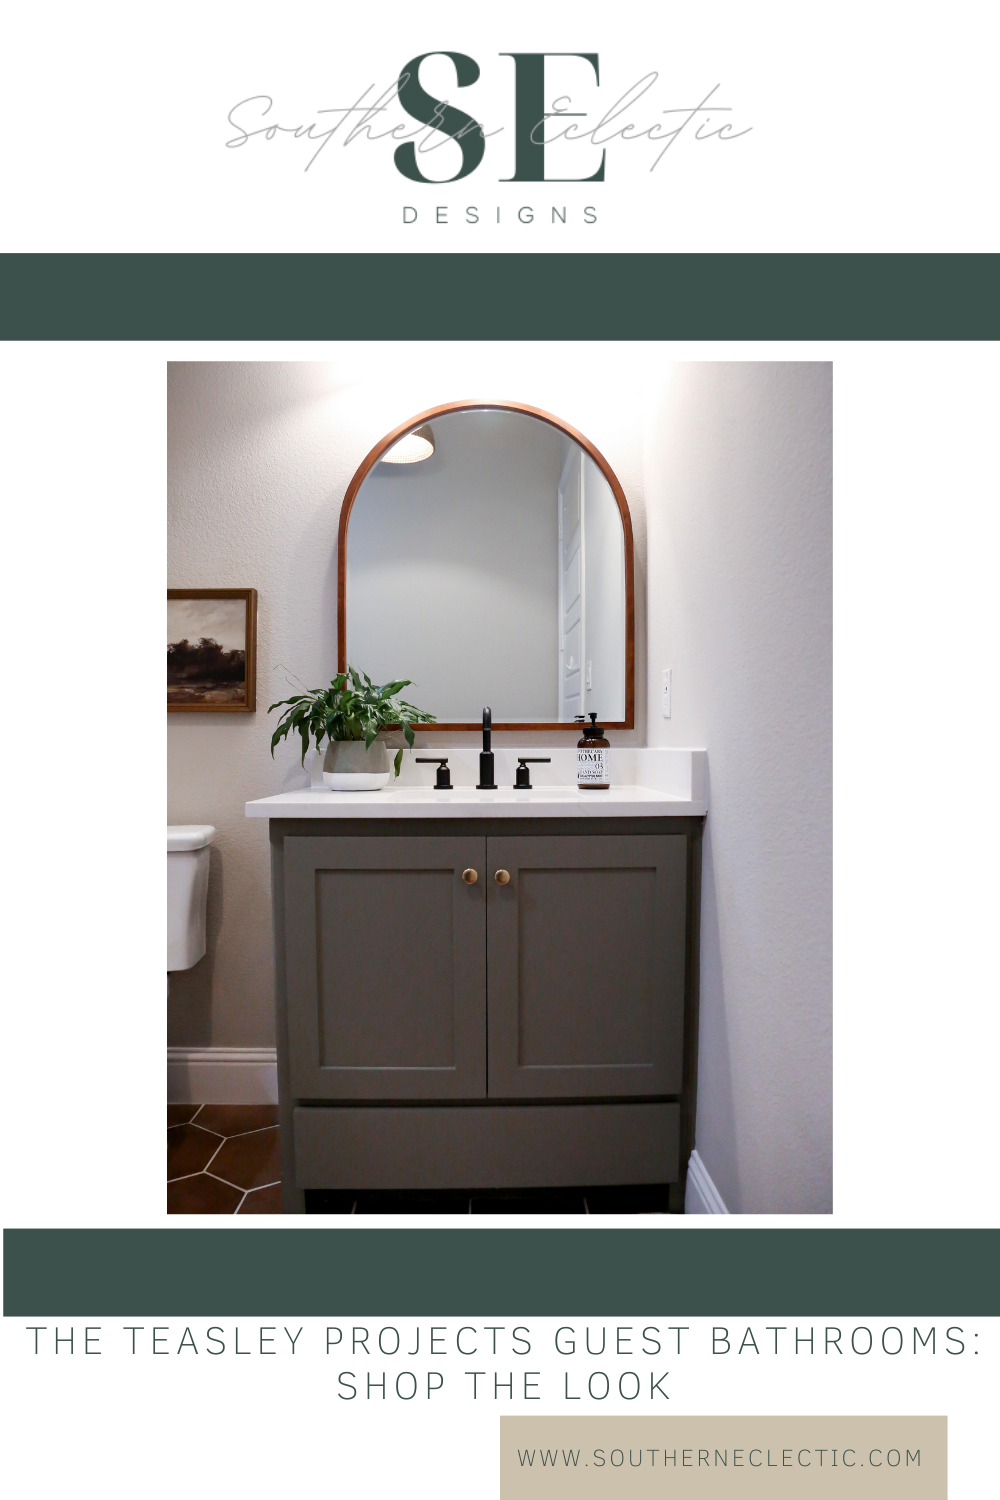 The Teasley Projects Guest Bathrooms: Shop the Look
Pinterest Graphic